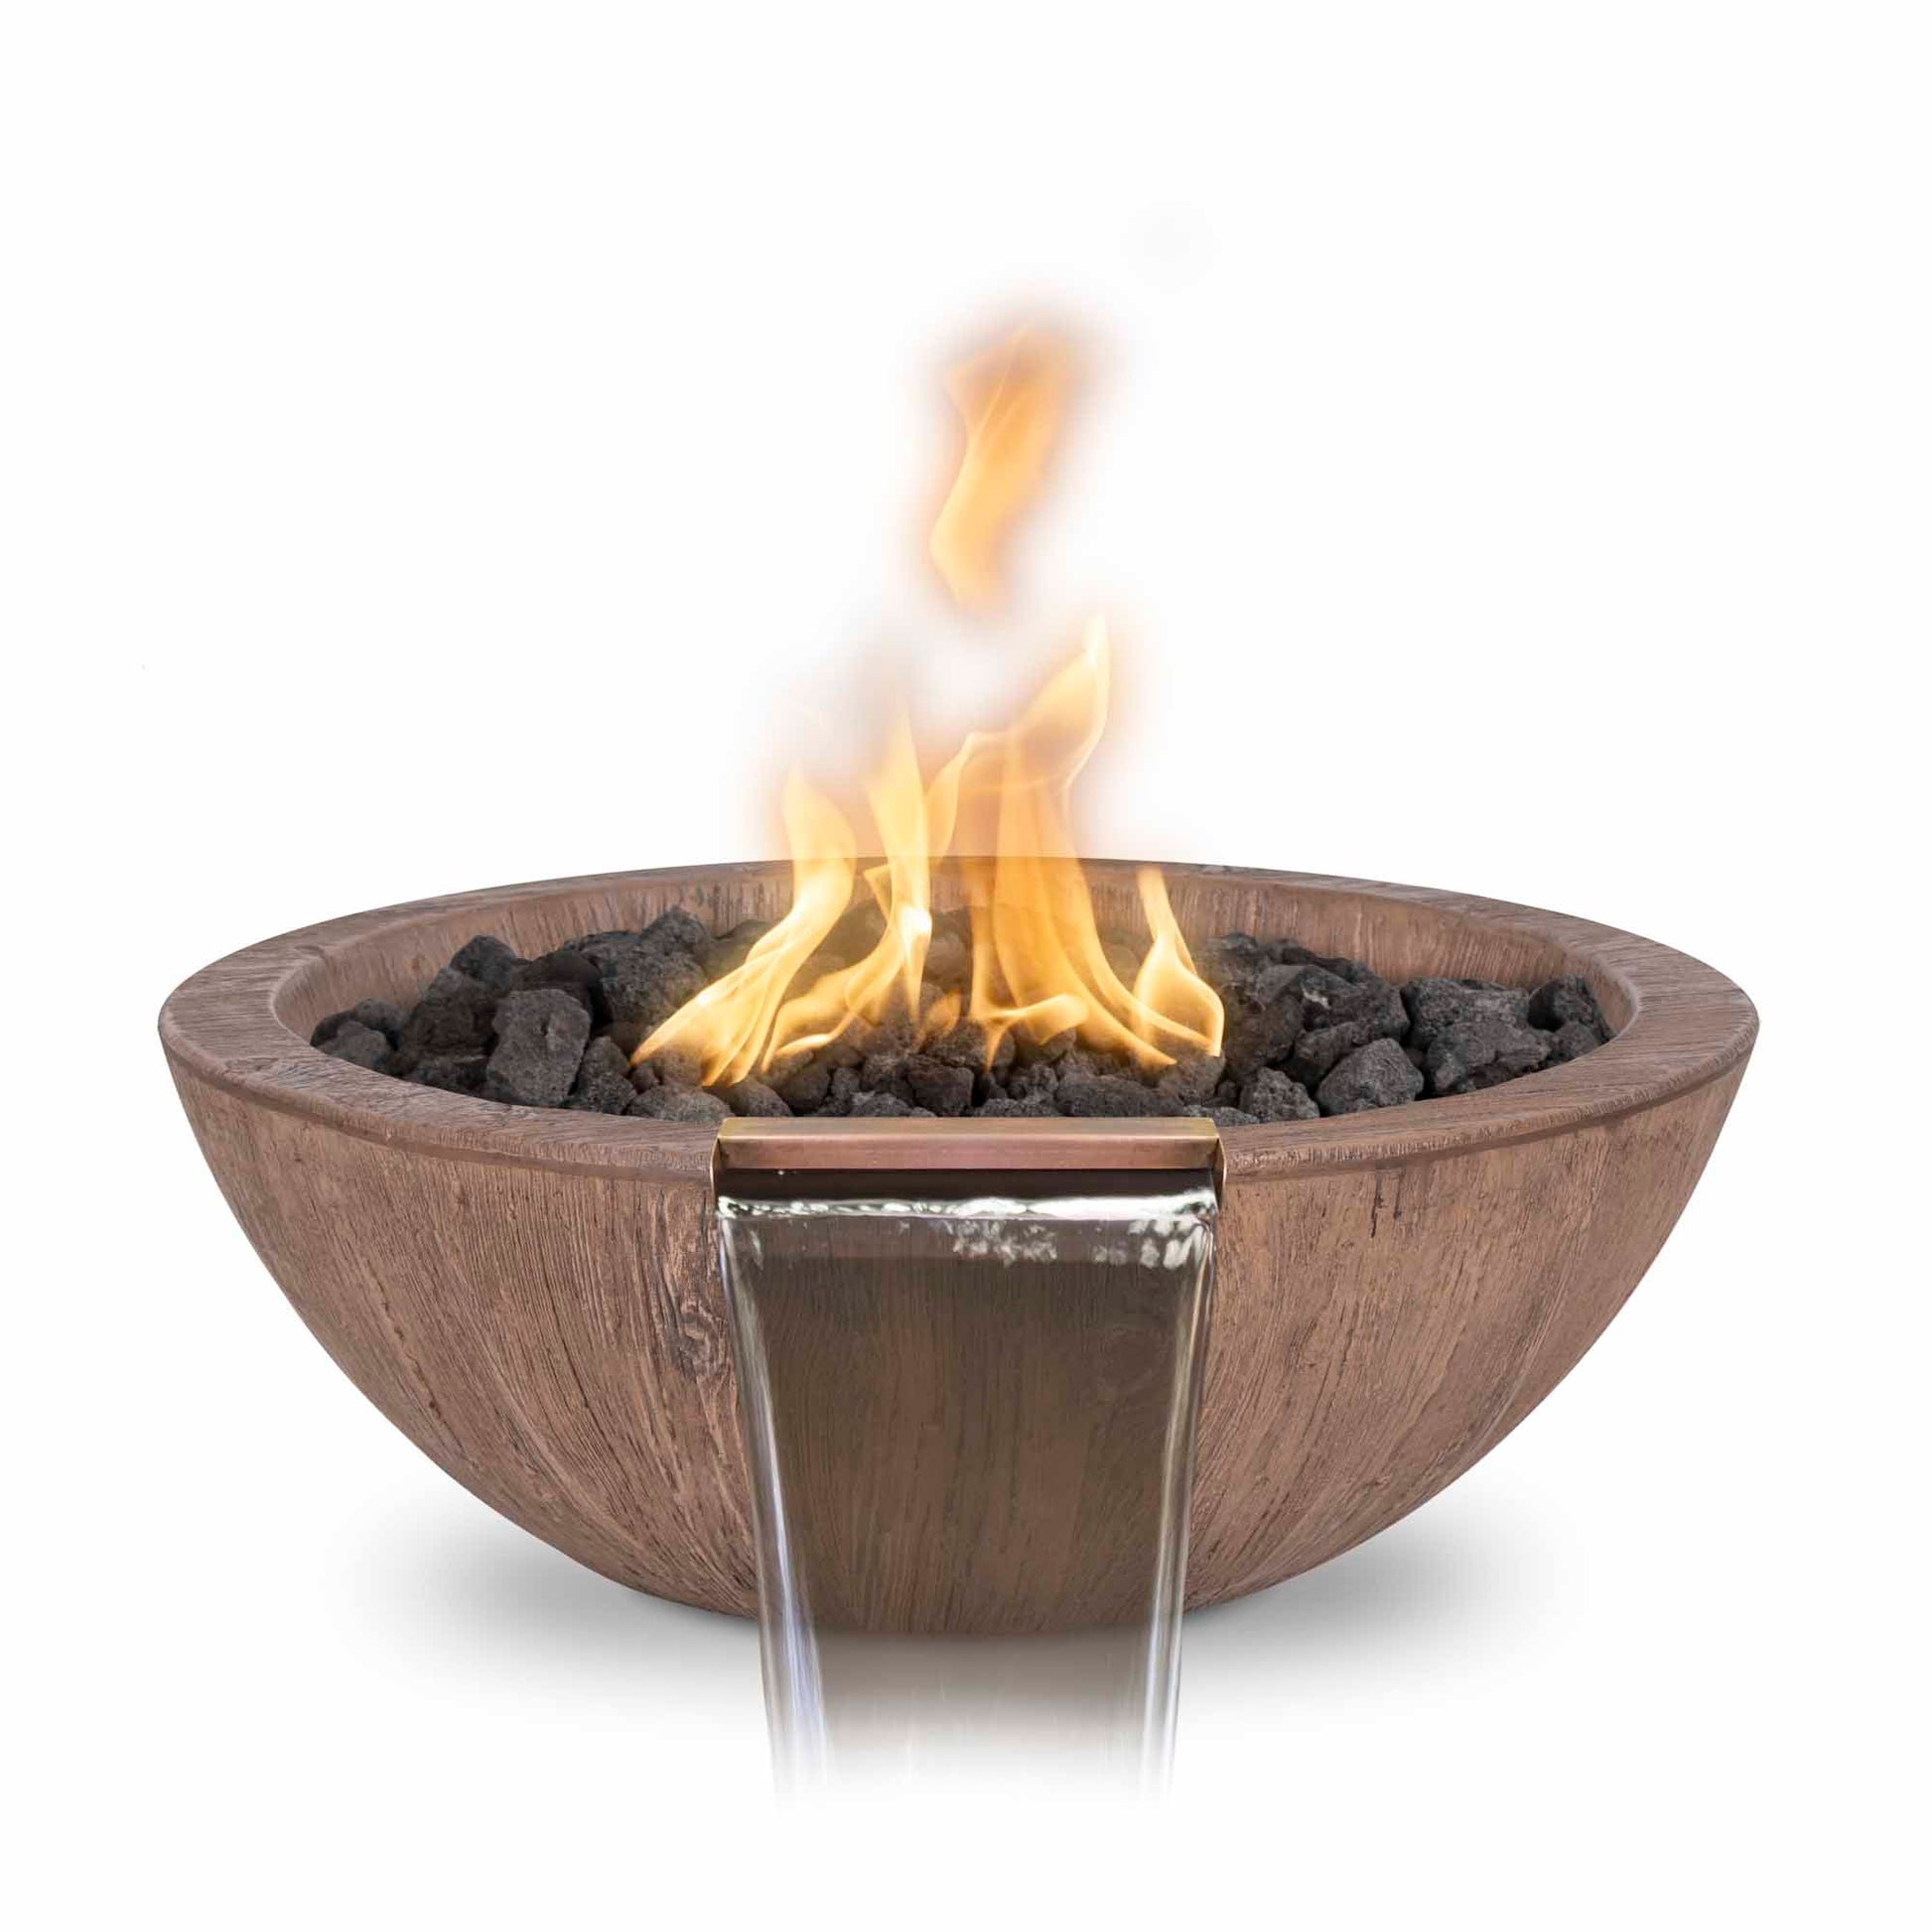 The Outdoor Plus Round Sedona 27" Oak Wood Grain Liquid Propane Fire & Water Bowl with Match Lit with Flame Sense Ignition